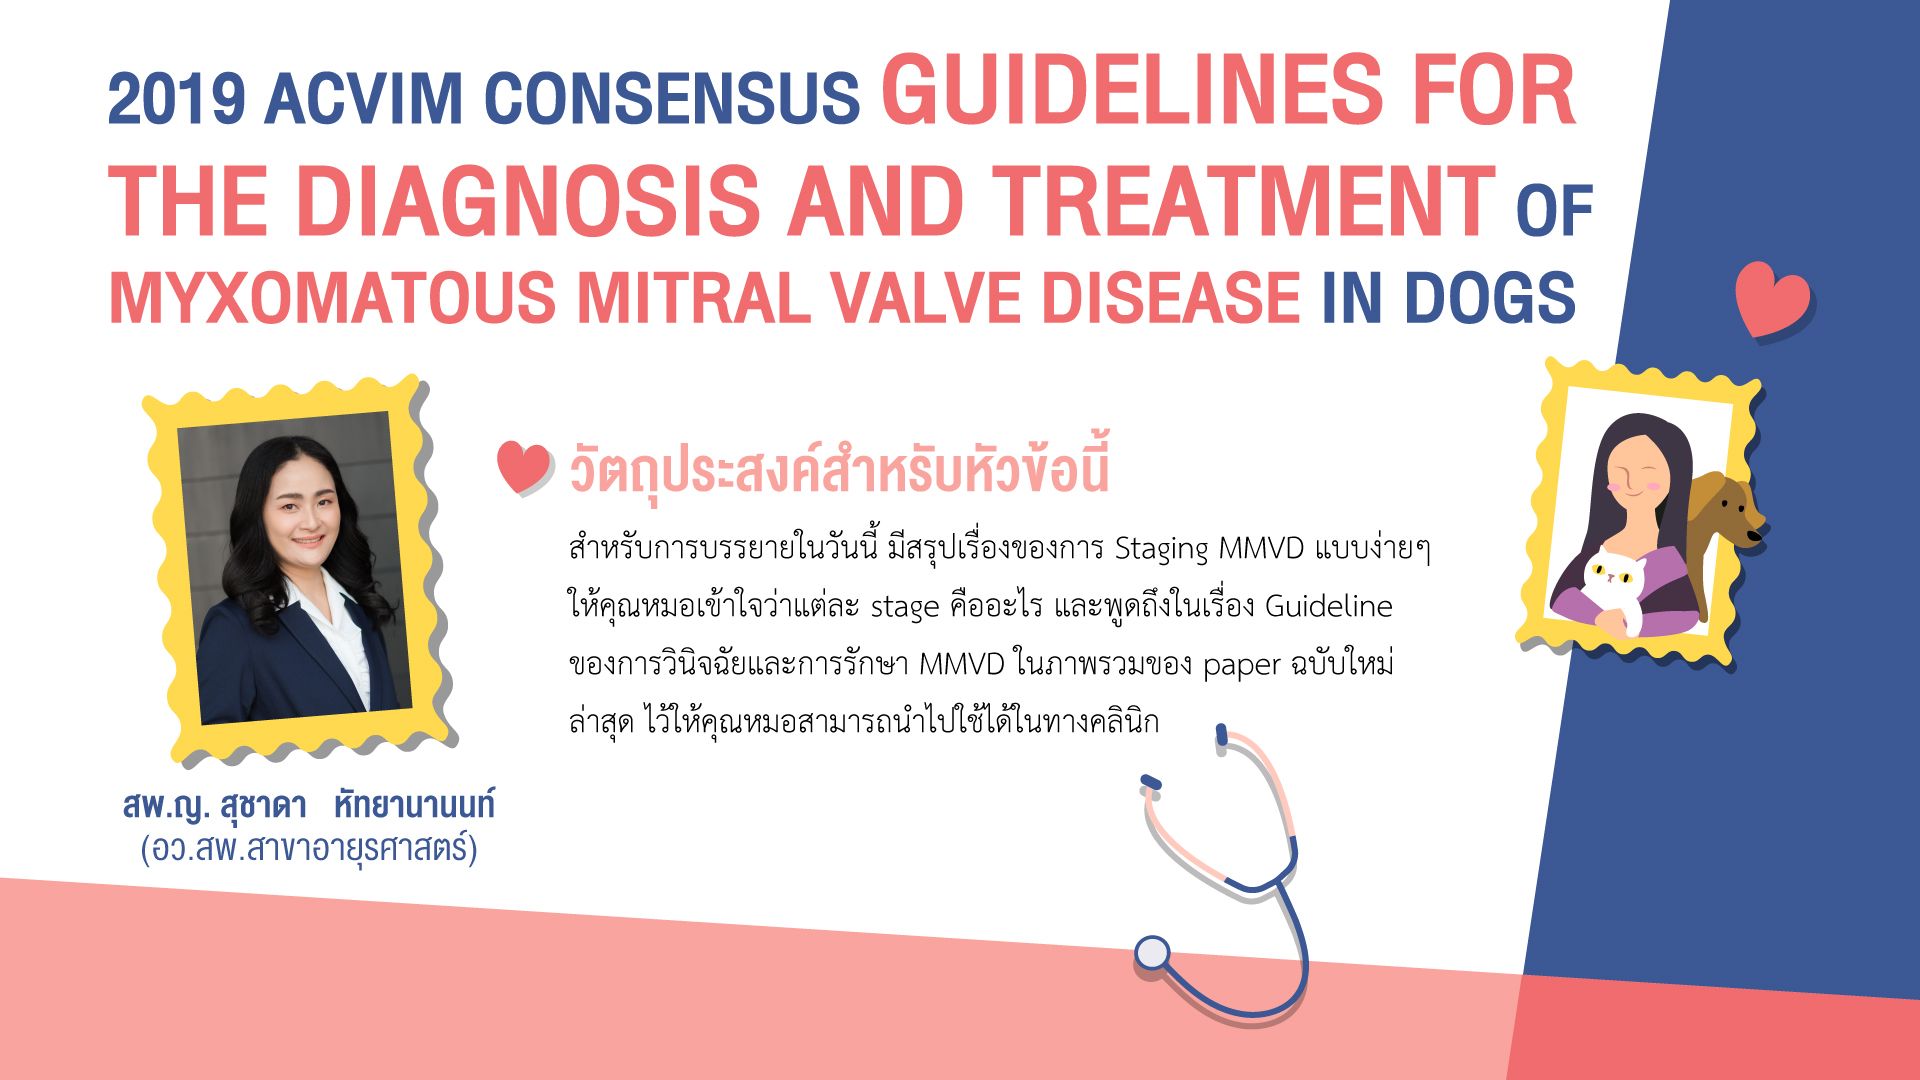 2019 ACVIM CONSENSUS GUIDELINES FOR THE DIAGNOSIS AND TREATMENT OF MYXOMATOUS MITRAL VALVE DISEASE IN DOGS